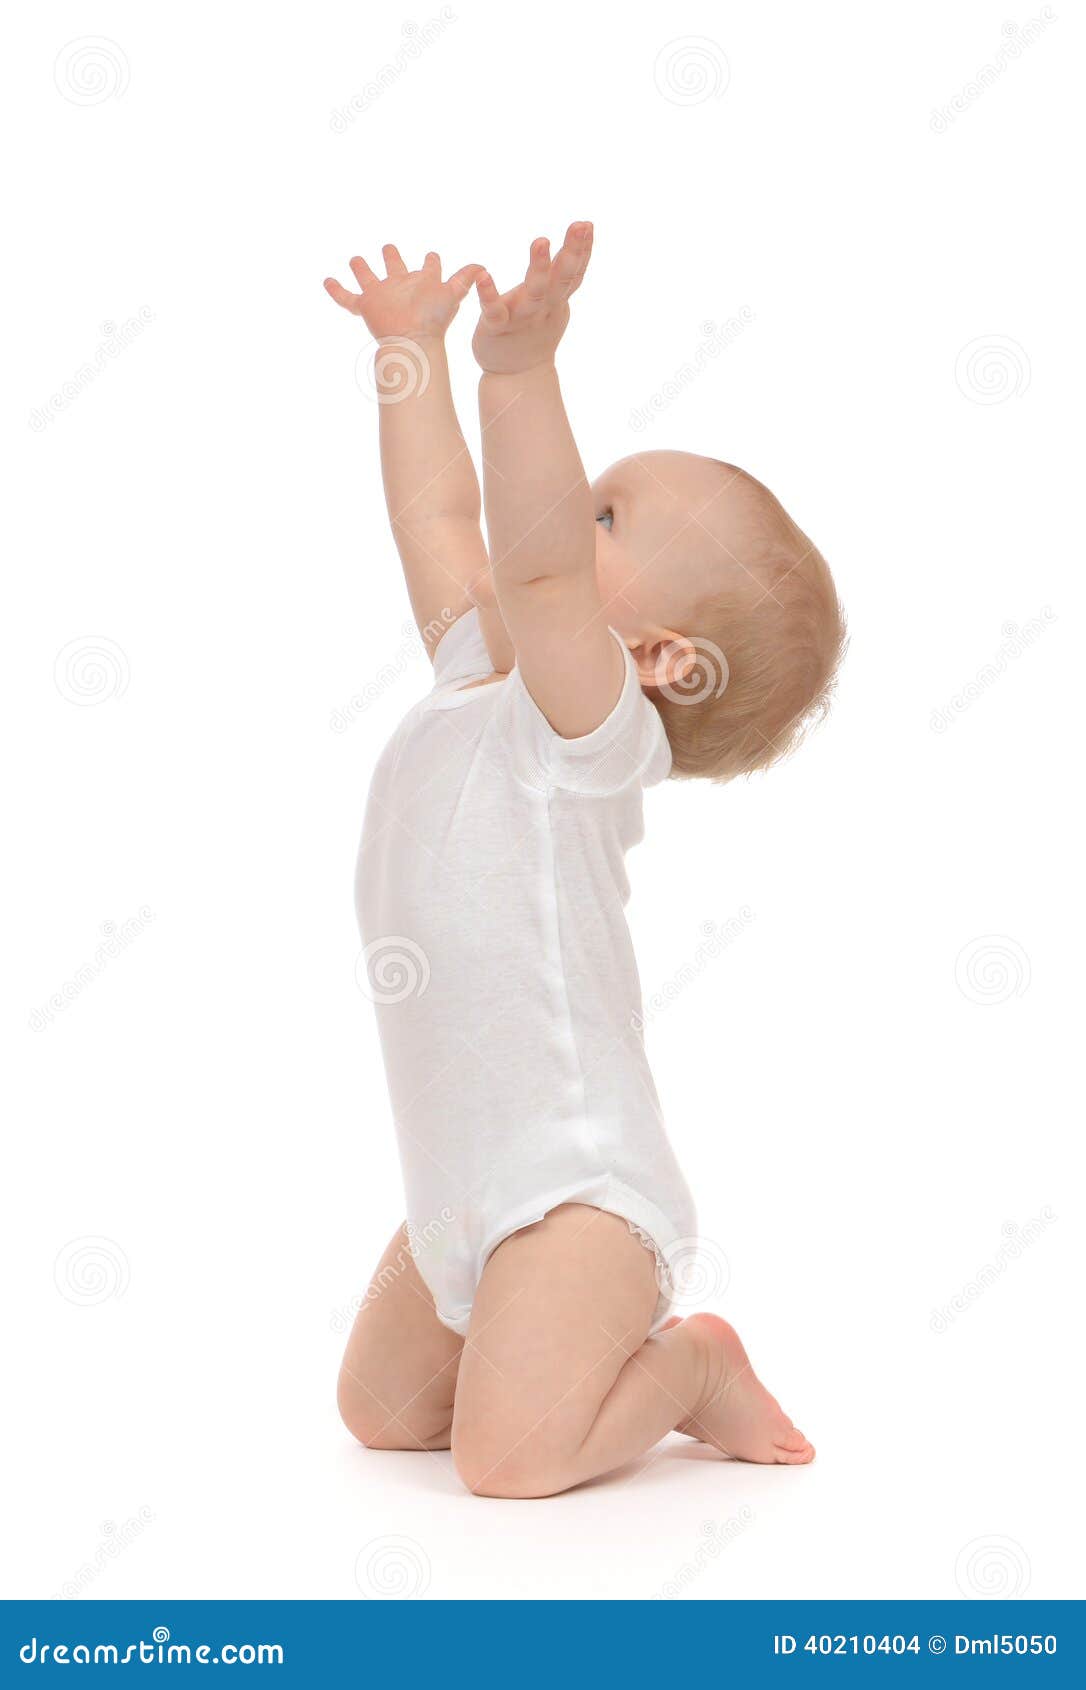 Infant Child Baby Toddler Sitting Raise Hands Up Stock ...